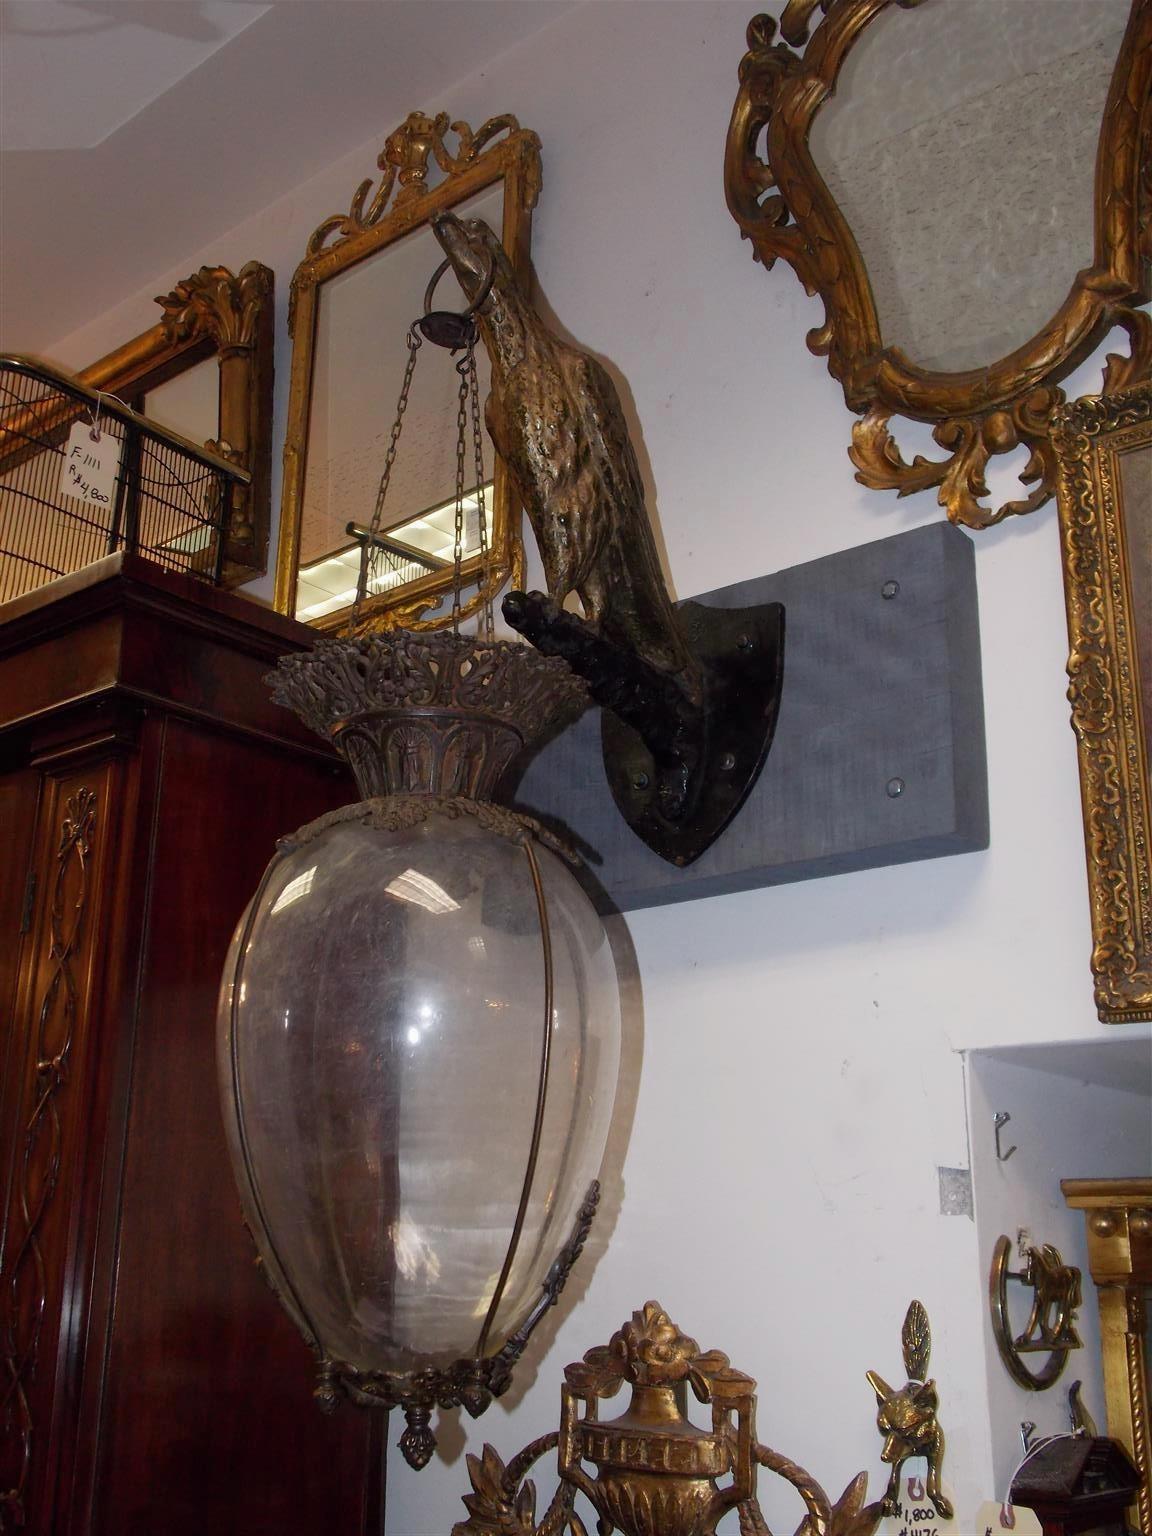 American hanging Apothecary show globe with a mounted cast iron painted and gilded eagle. Globe was filled with a colorful green or red liquid to warn a largely illiterate public of a Plaque / Corona Virus . Early 19th century.